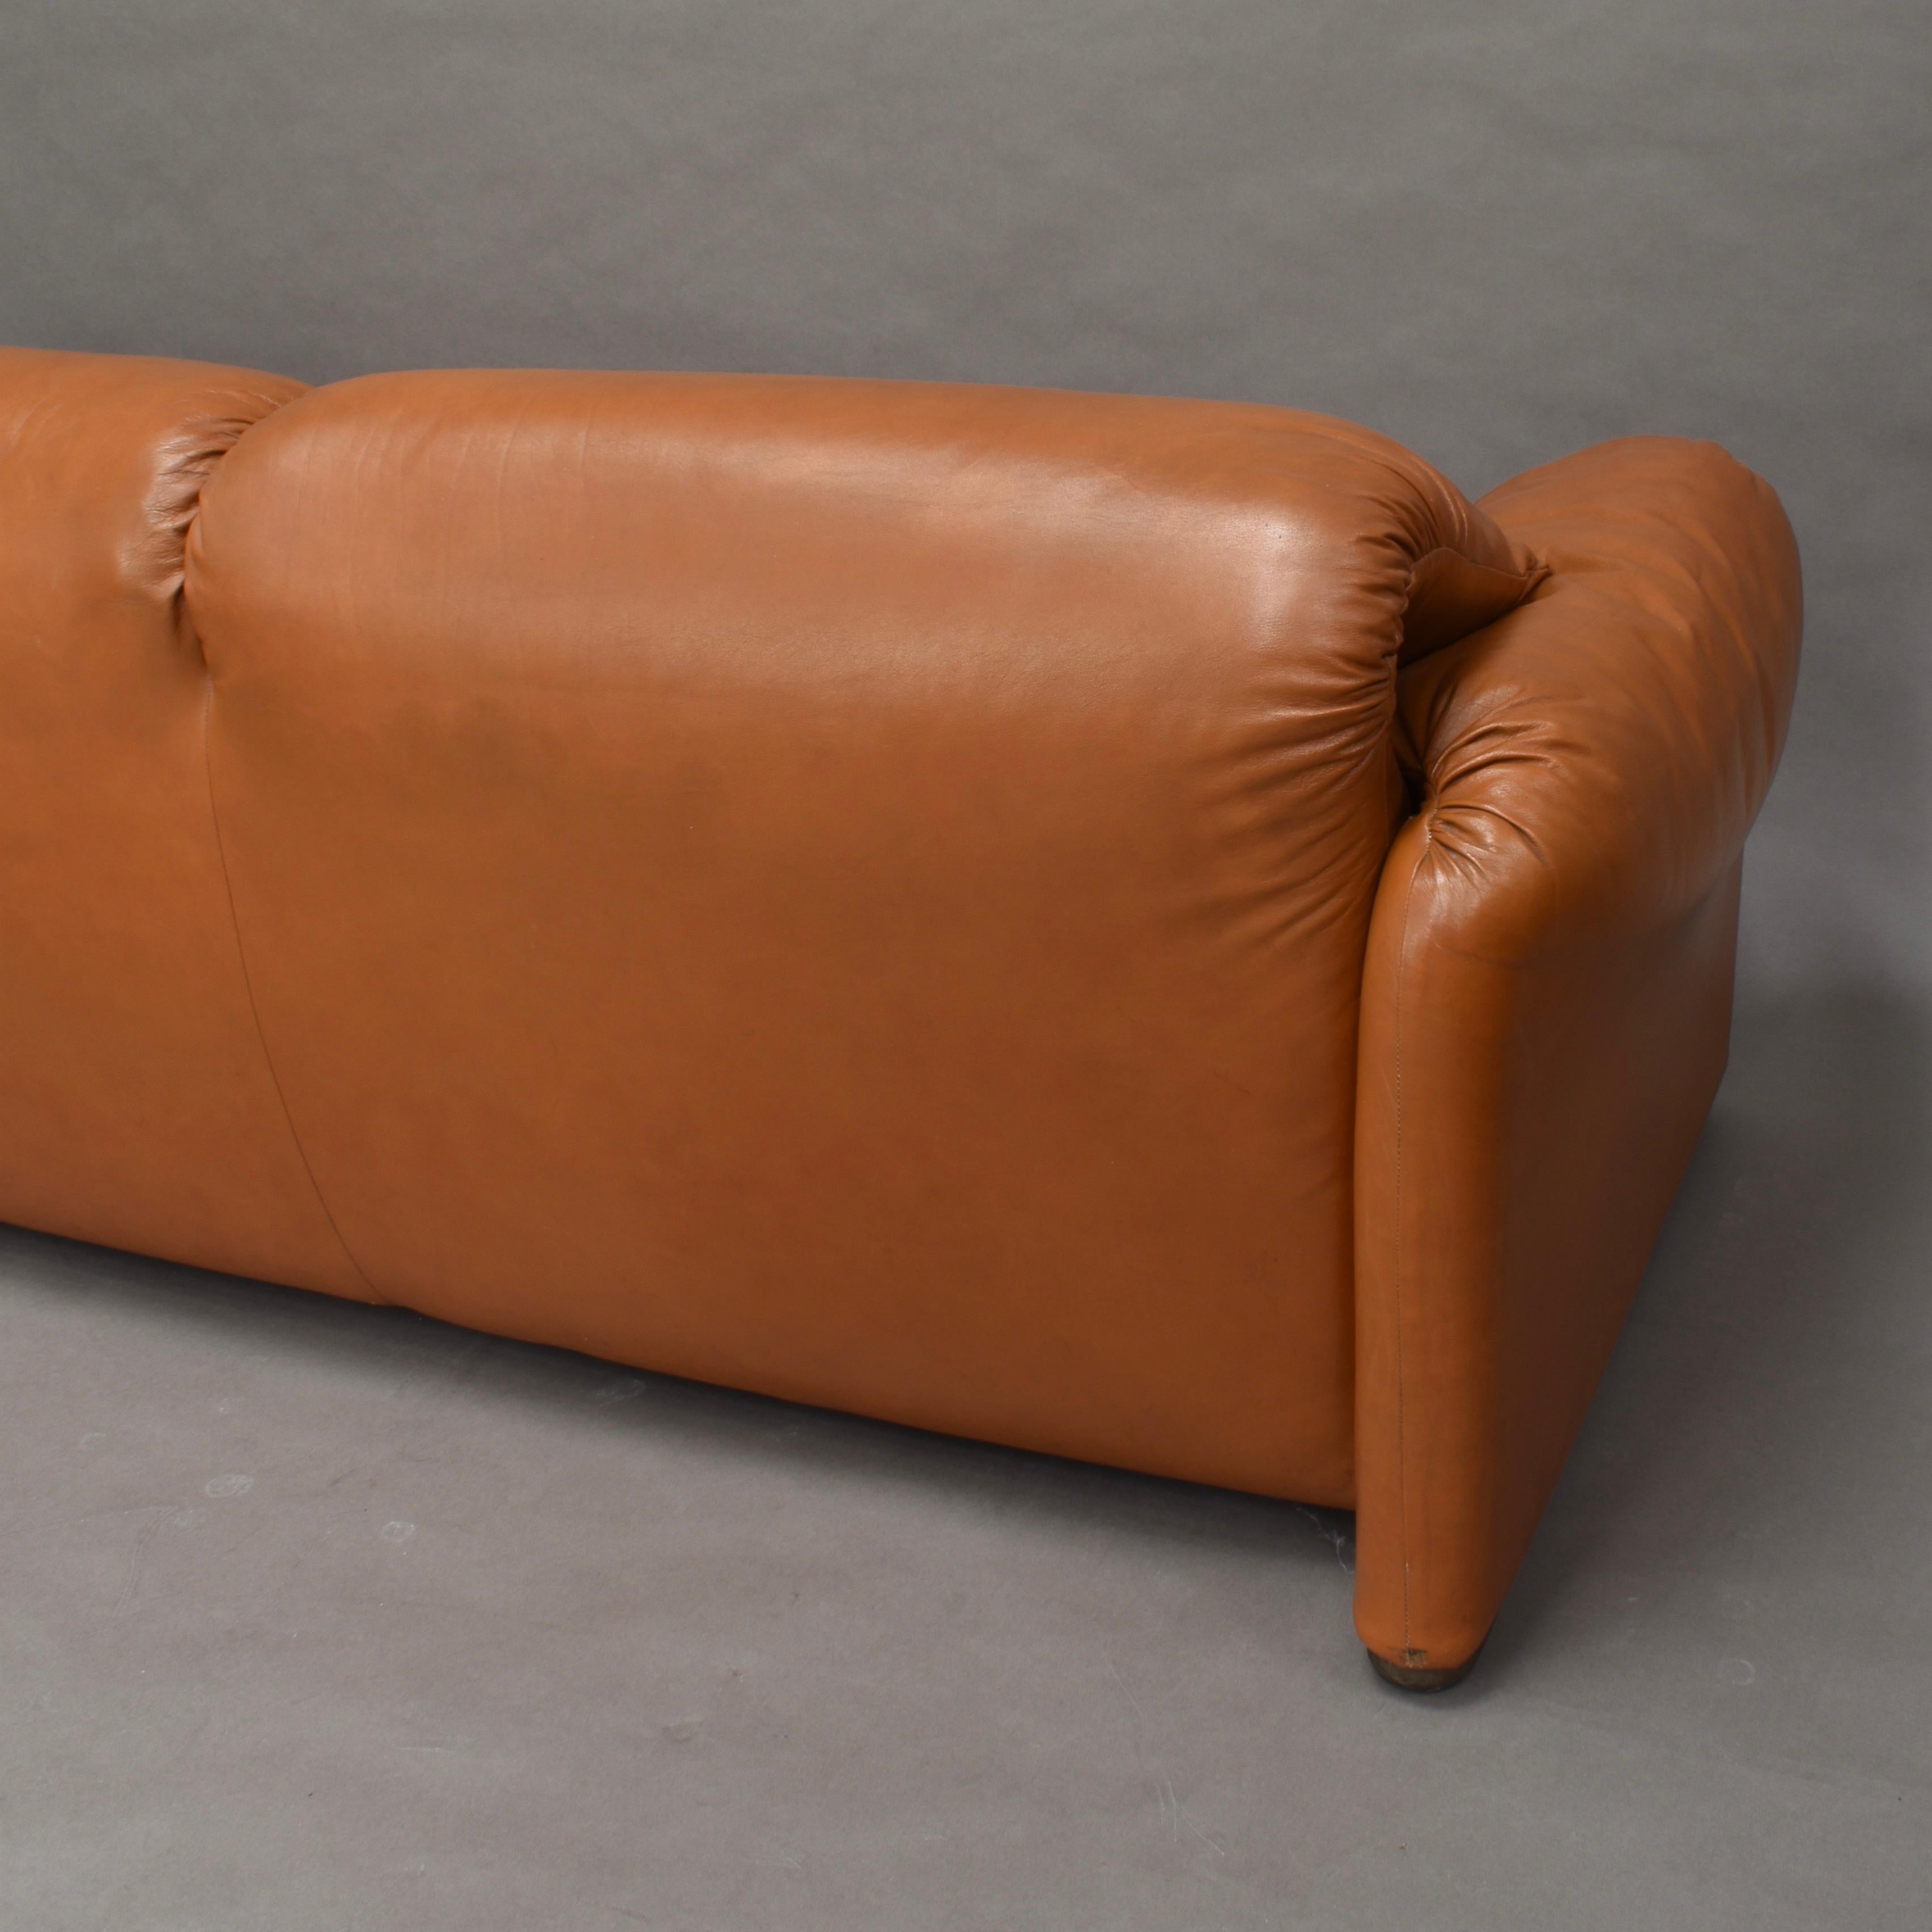 Early Maralunga Sofa in Tan Leather by Vico Magistretti for Cassina, Italy, 1973 10